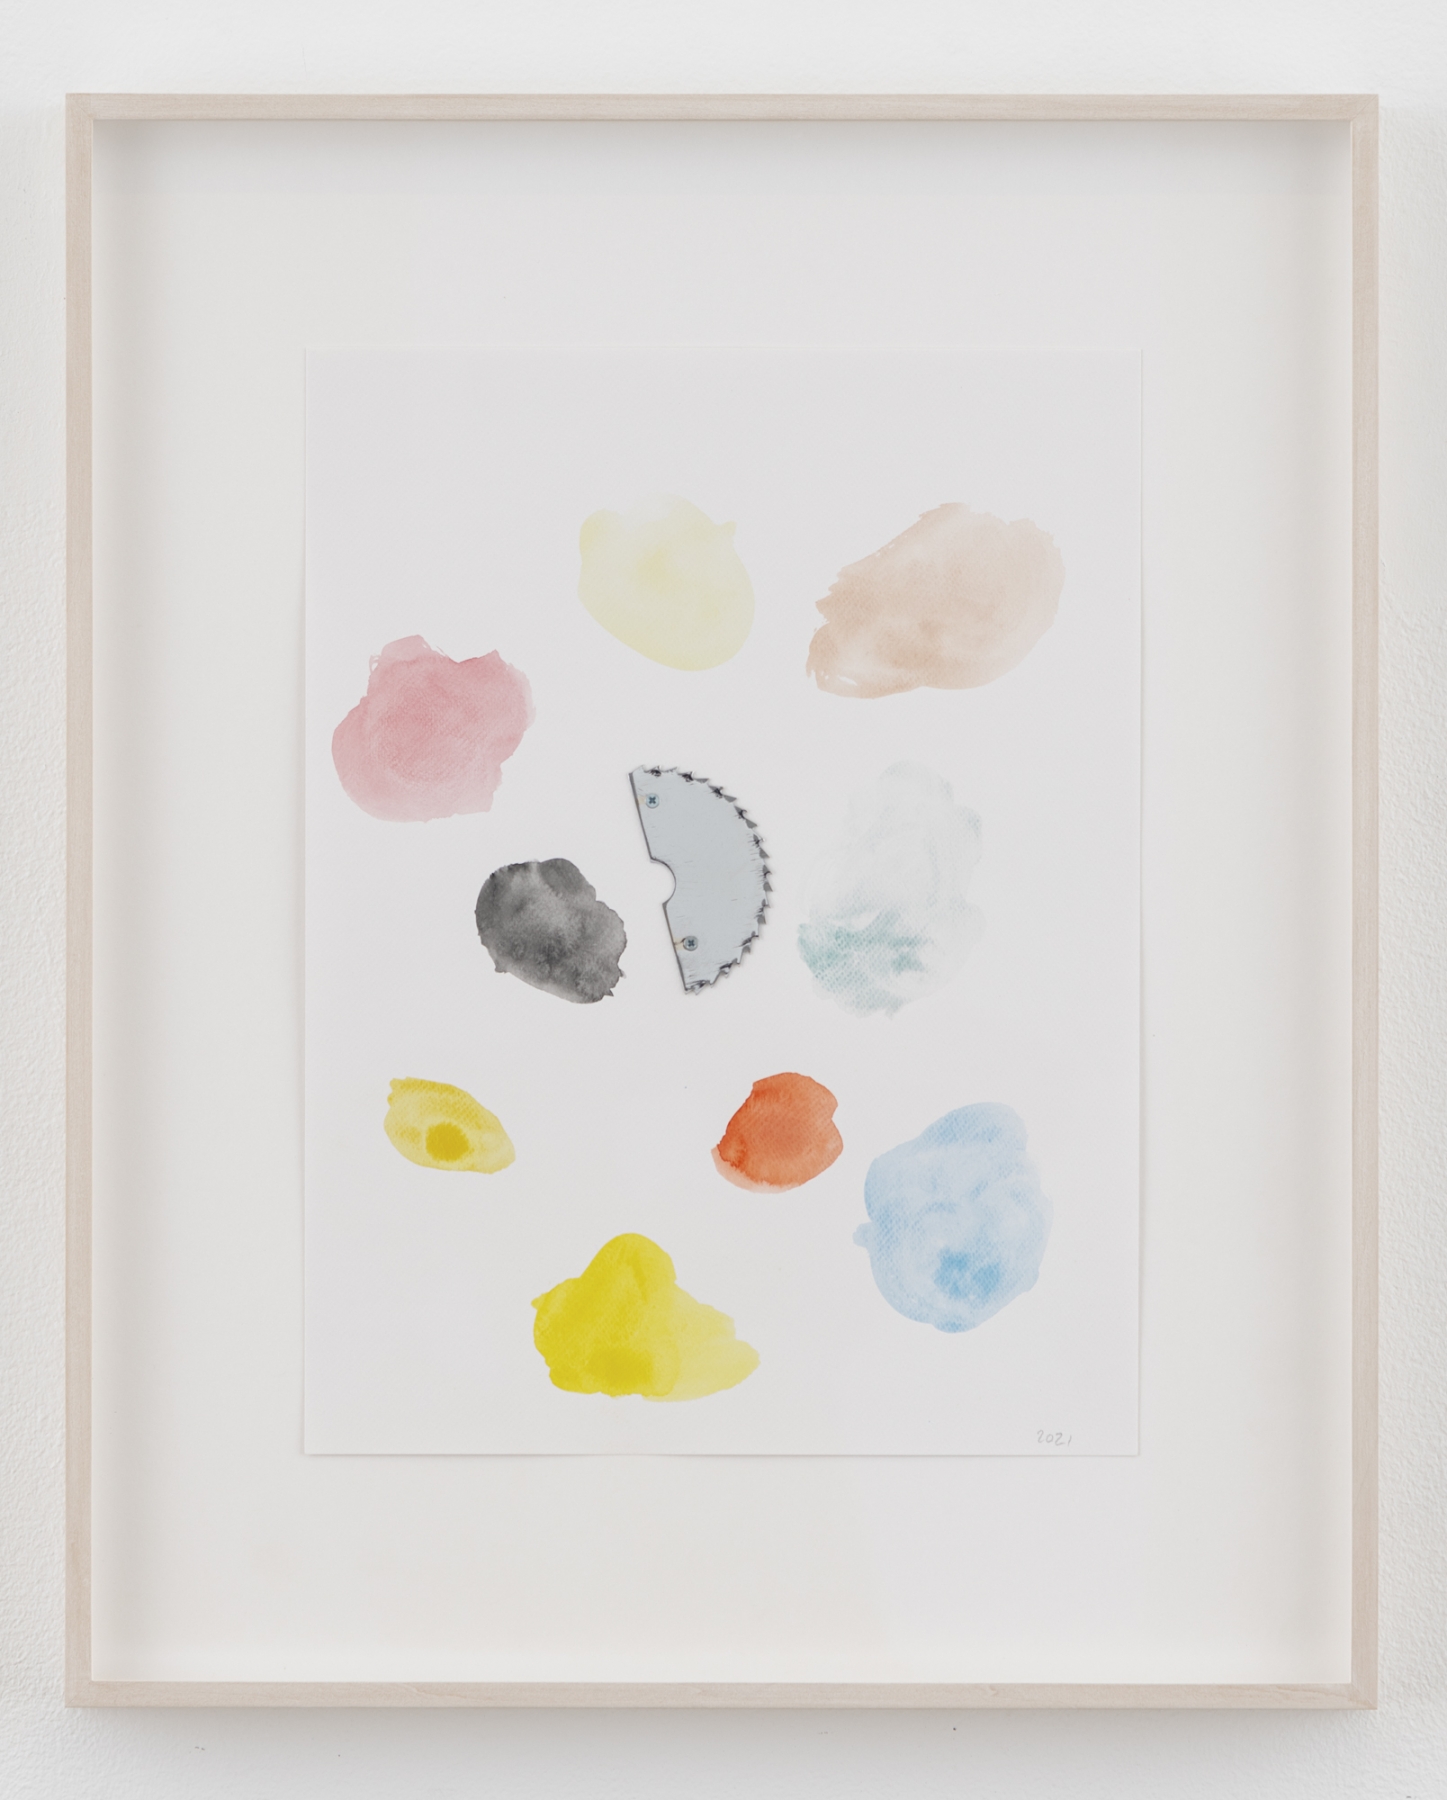 Monika Baer
Loose change 2, 2021
Watercolor, chrome-plated saw blade fragment and screws on paper
Paper: 15 3/4 x 11 3/4 inches (40 x 29.8 cm)
Frame: 22 3/4 x 18 1/2 x 1 3/8 inches (57.8 x 47 x 3.5 cm)